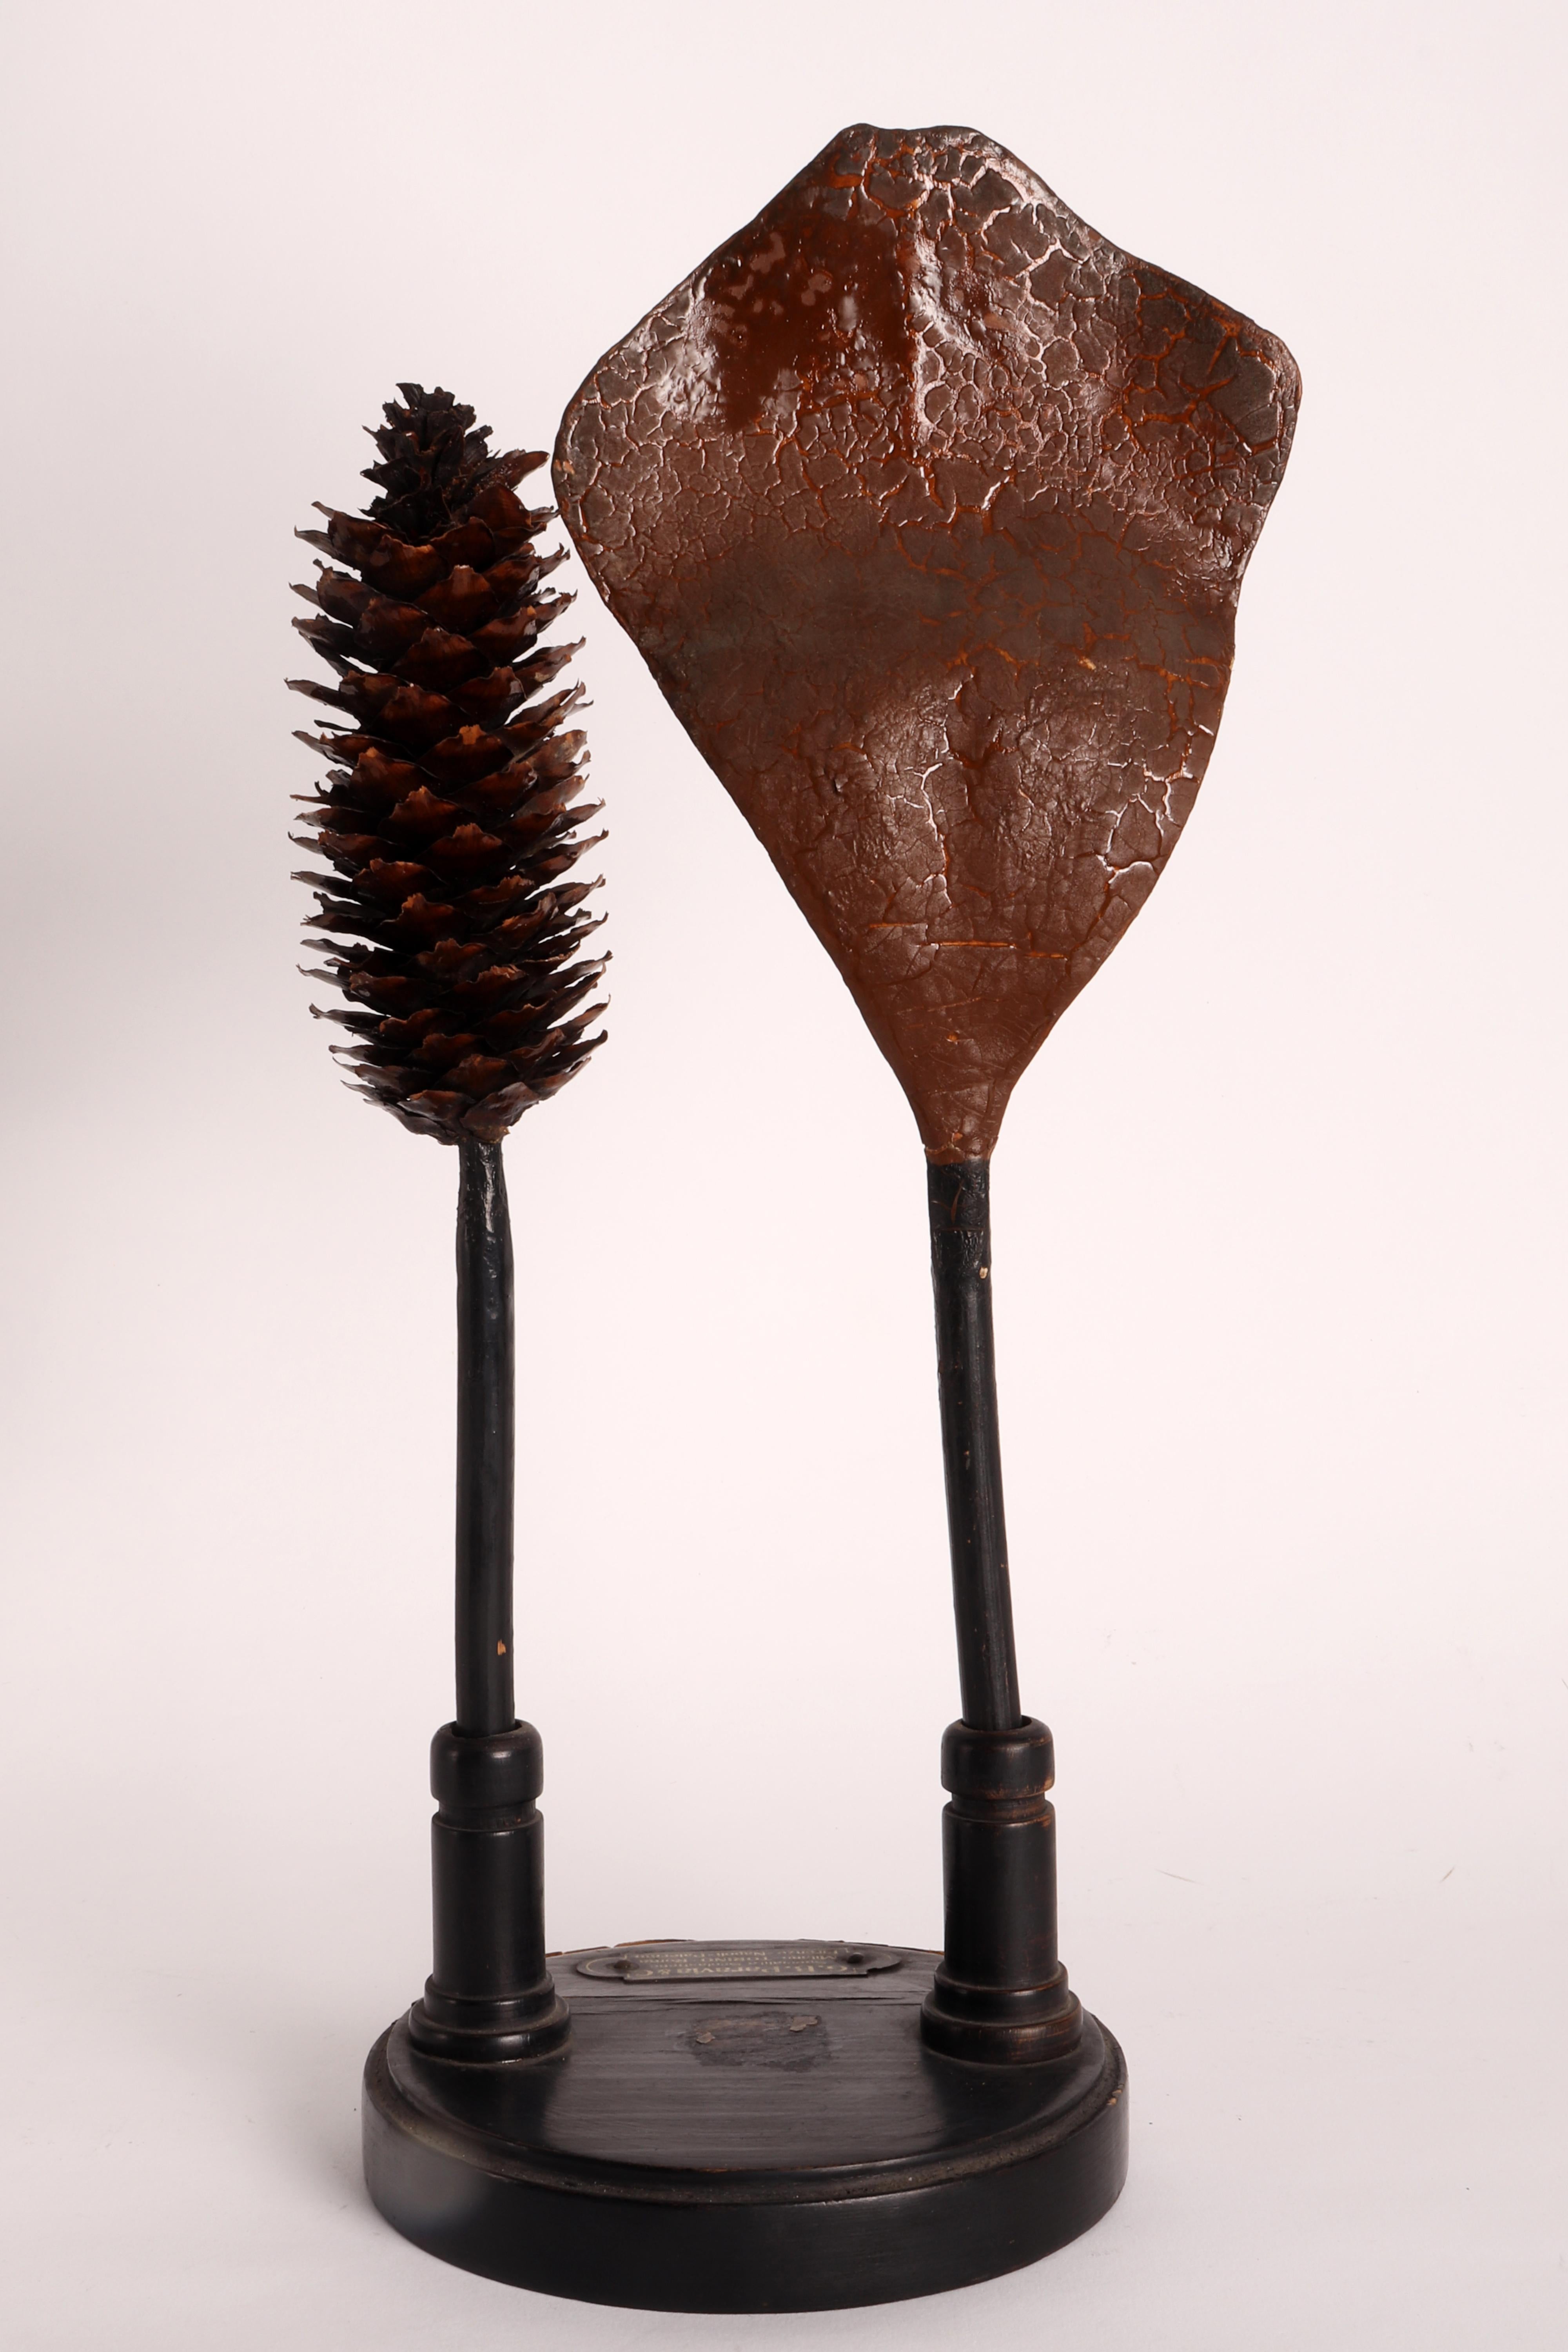 A rare example of a botanical maquette for didactic use by Professor T. Ferraris, depicting a (natural) strobilus and a scale with ovules (about 12 times enlarged) of Spruce (Picea excelsa Lk), a family of conifers. Made of paper mache, and hand